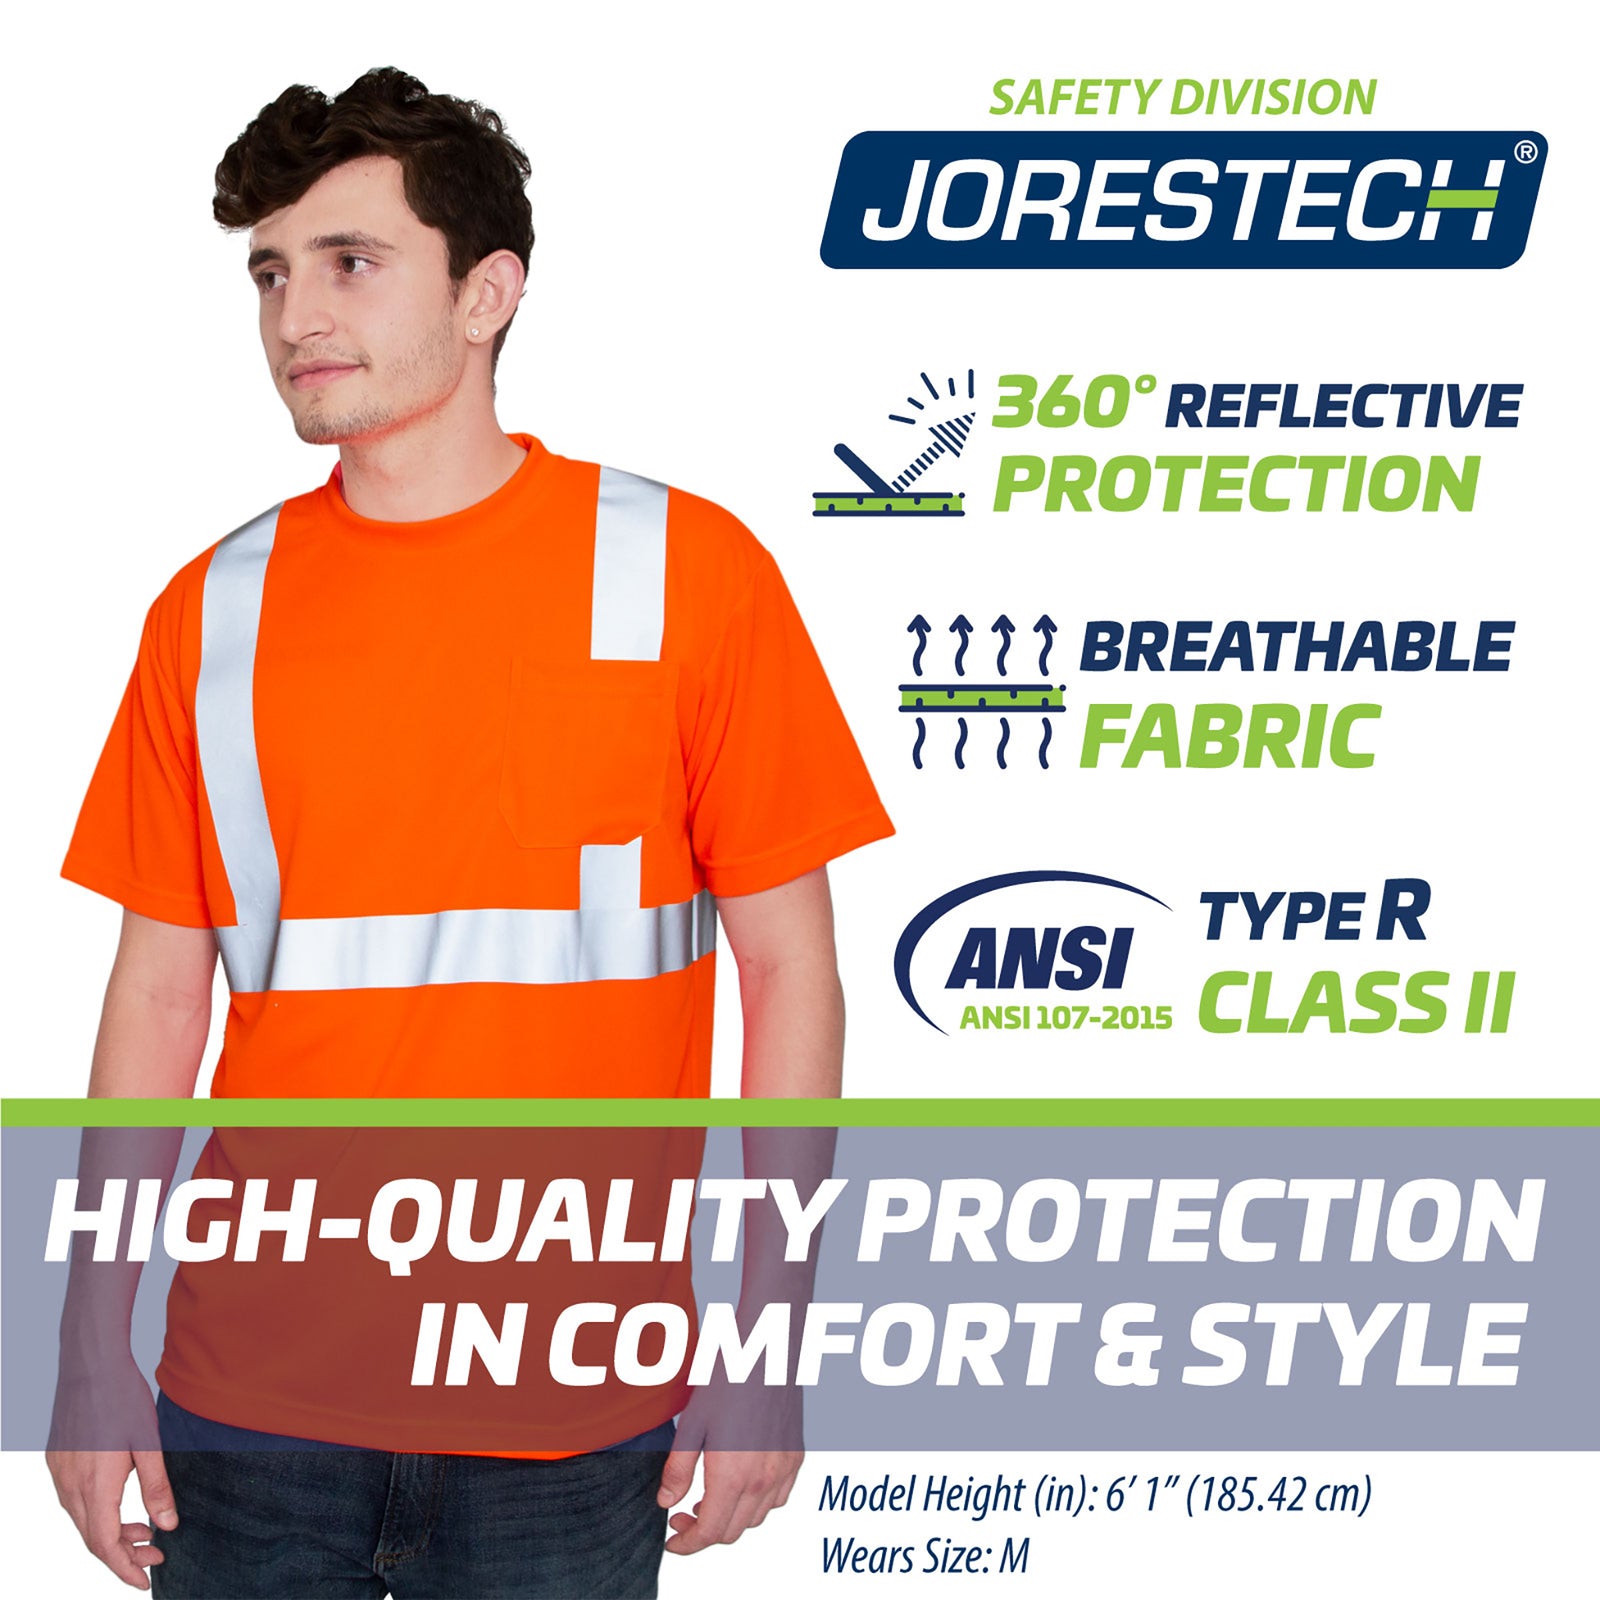 A worker wearing the JORESTECH all orange safety shirt. Image provides this information: 360 degrees of reflective protection. Breathable fabric. Type R class II. High quality protection in comfort and style.